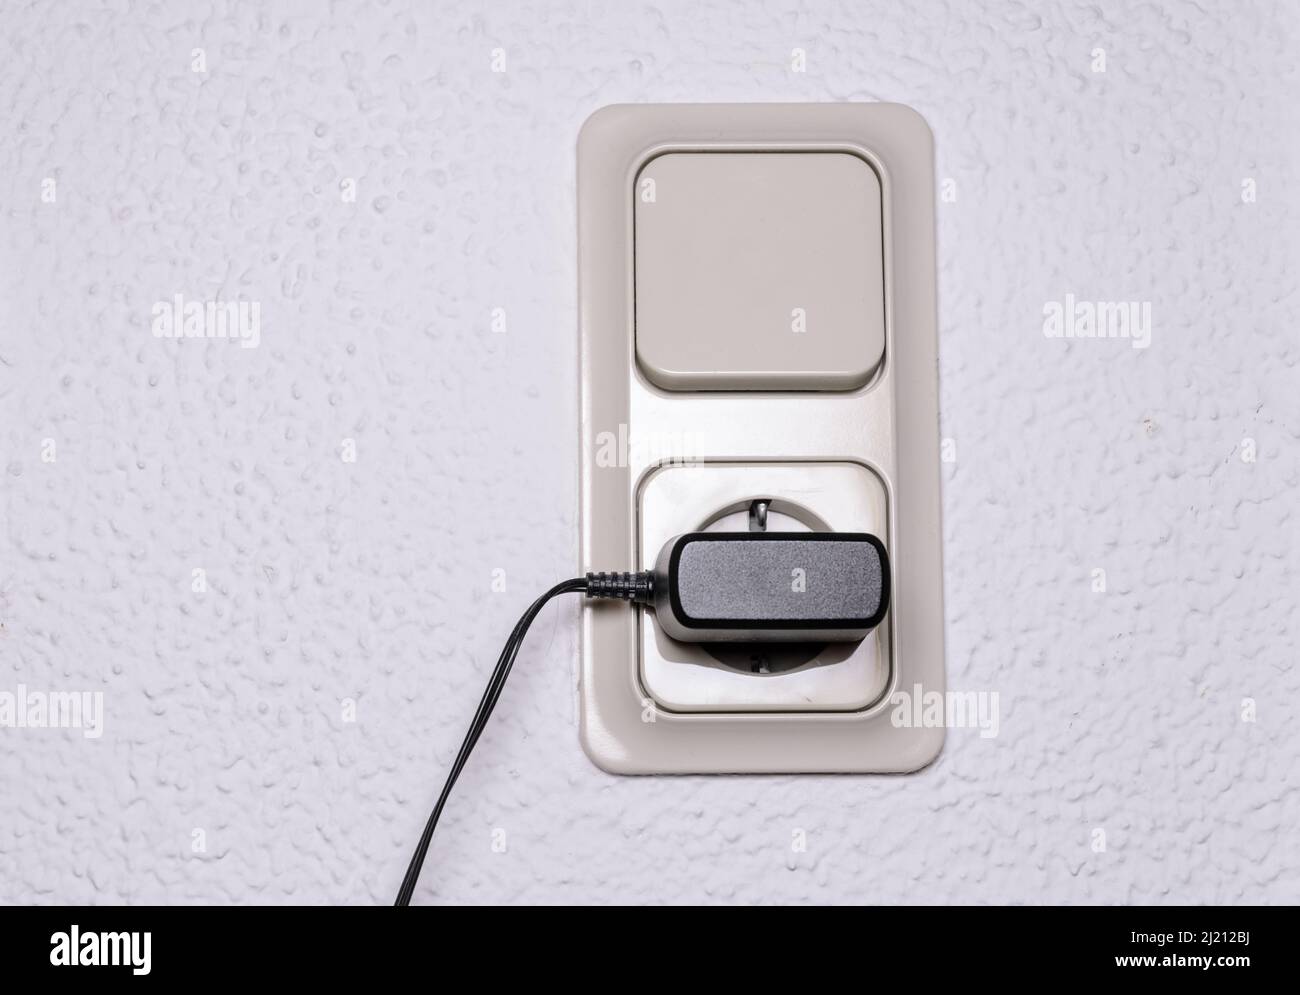 Modern light switch and german power outlet or socket on white wall indoors with black phone charger plugged in, Germany, Europe Stock Photo